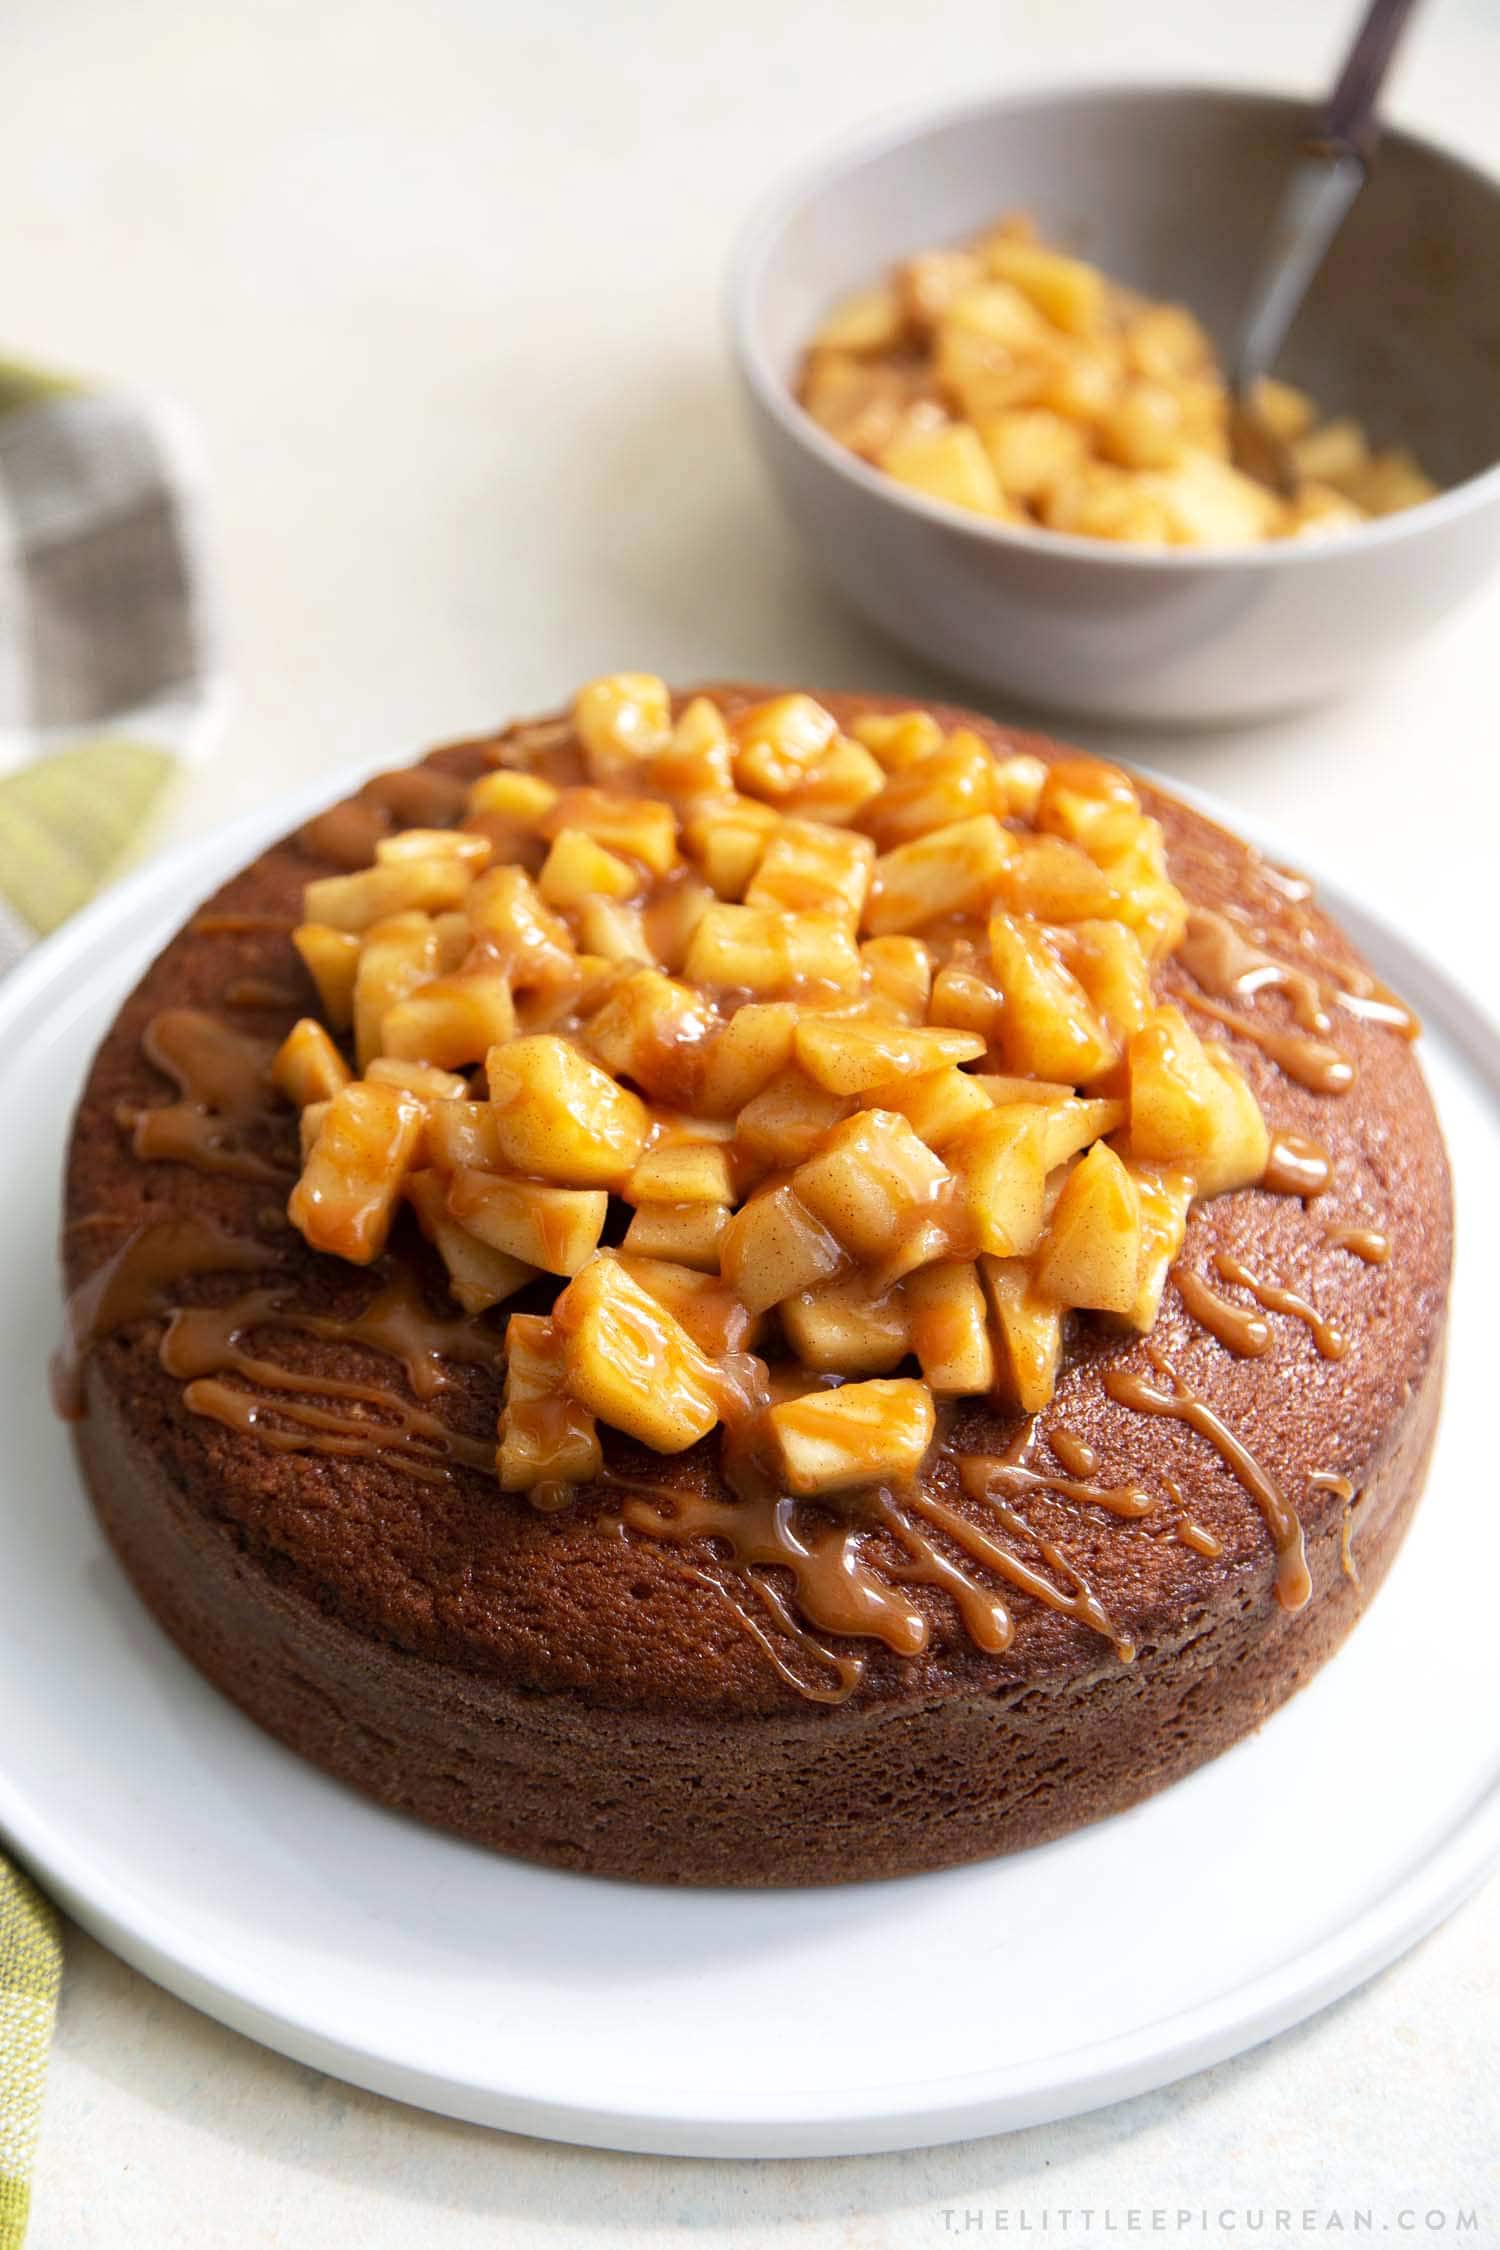 Apple Ginger Cake. Moist ginger cake is flavored with fresh grated ginger and candied ginger pieces. The baked cake is topped with ginger spiced apples and a drizzle of caramel.